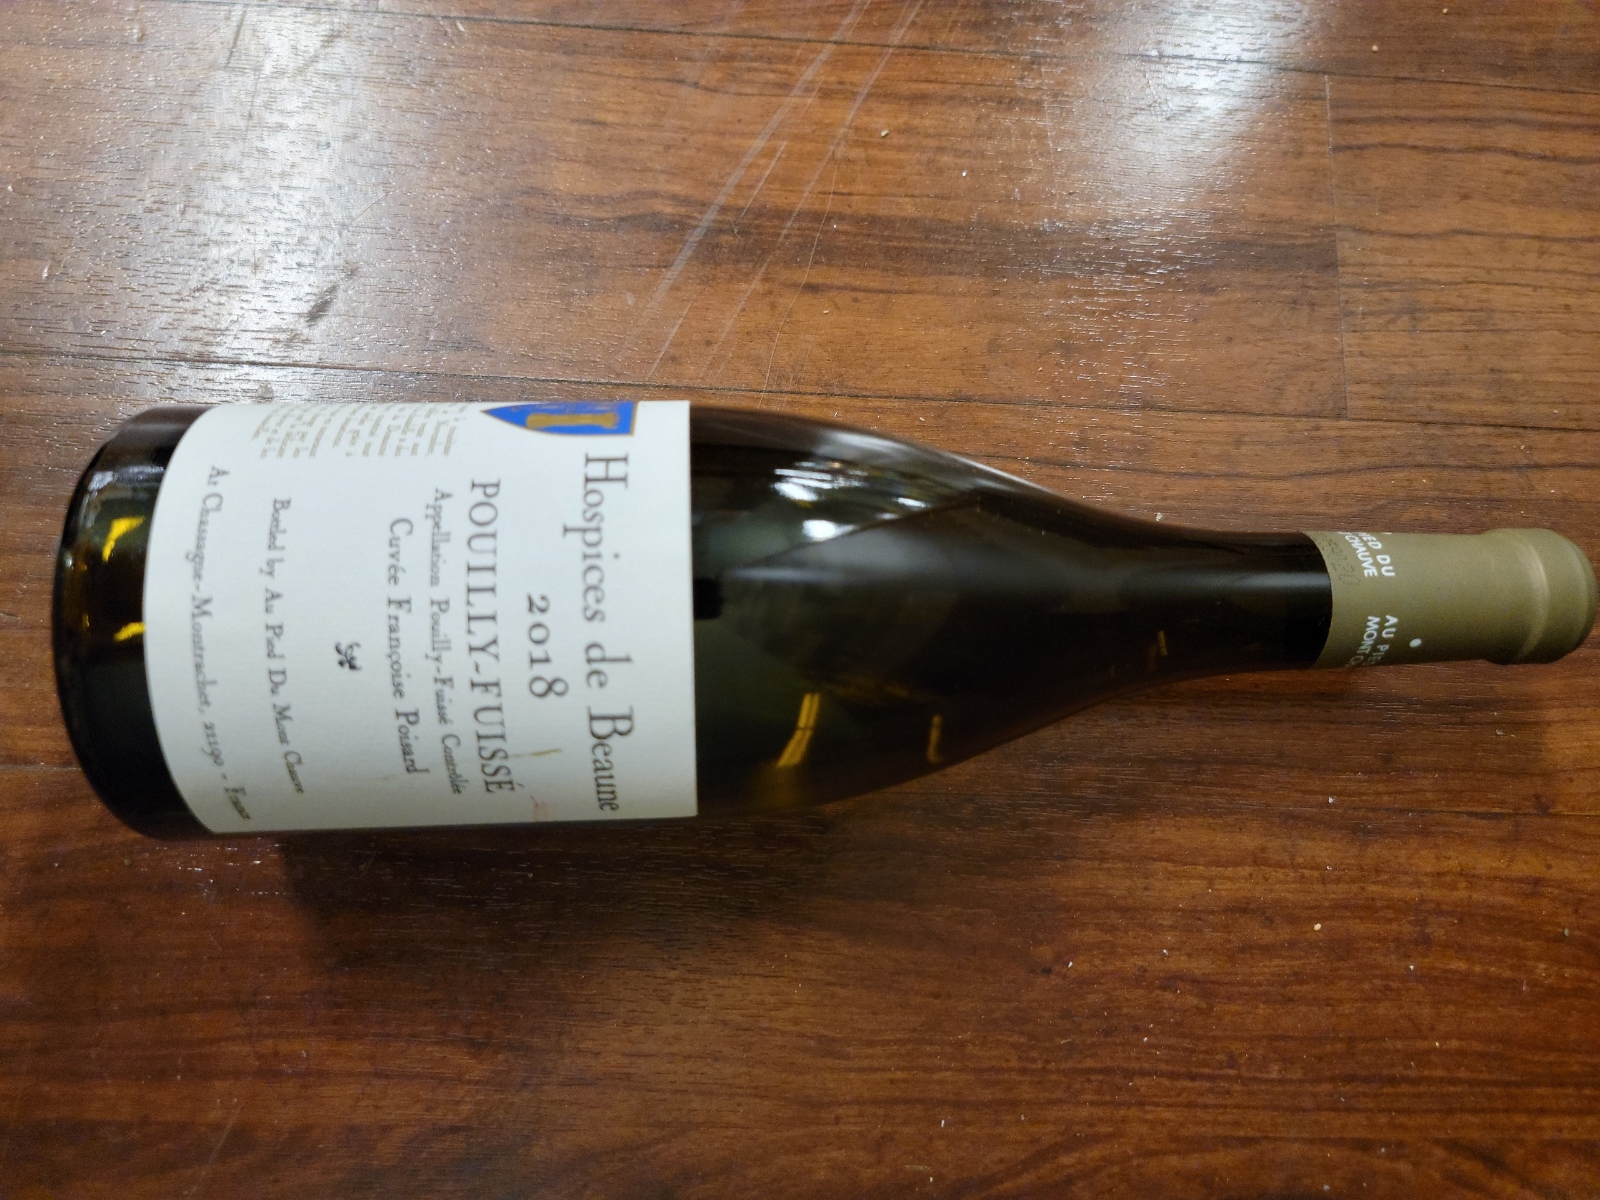 05 26 Pouilly Fuisse